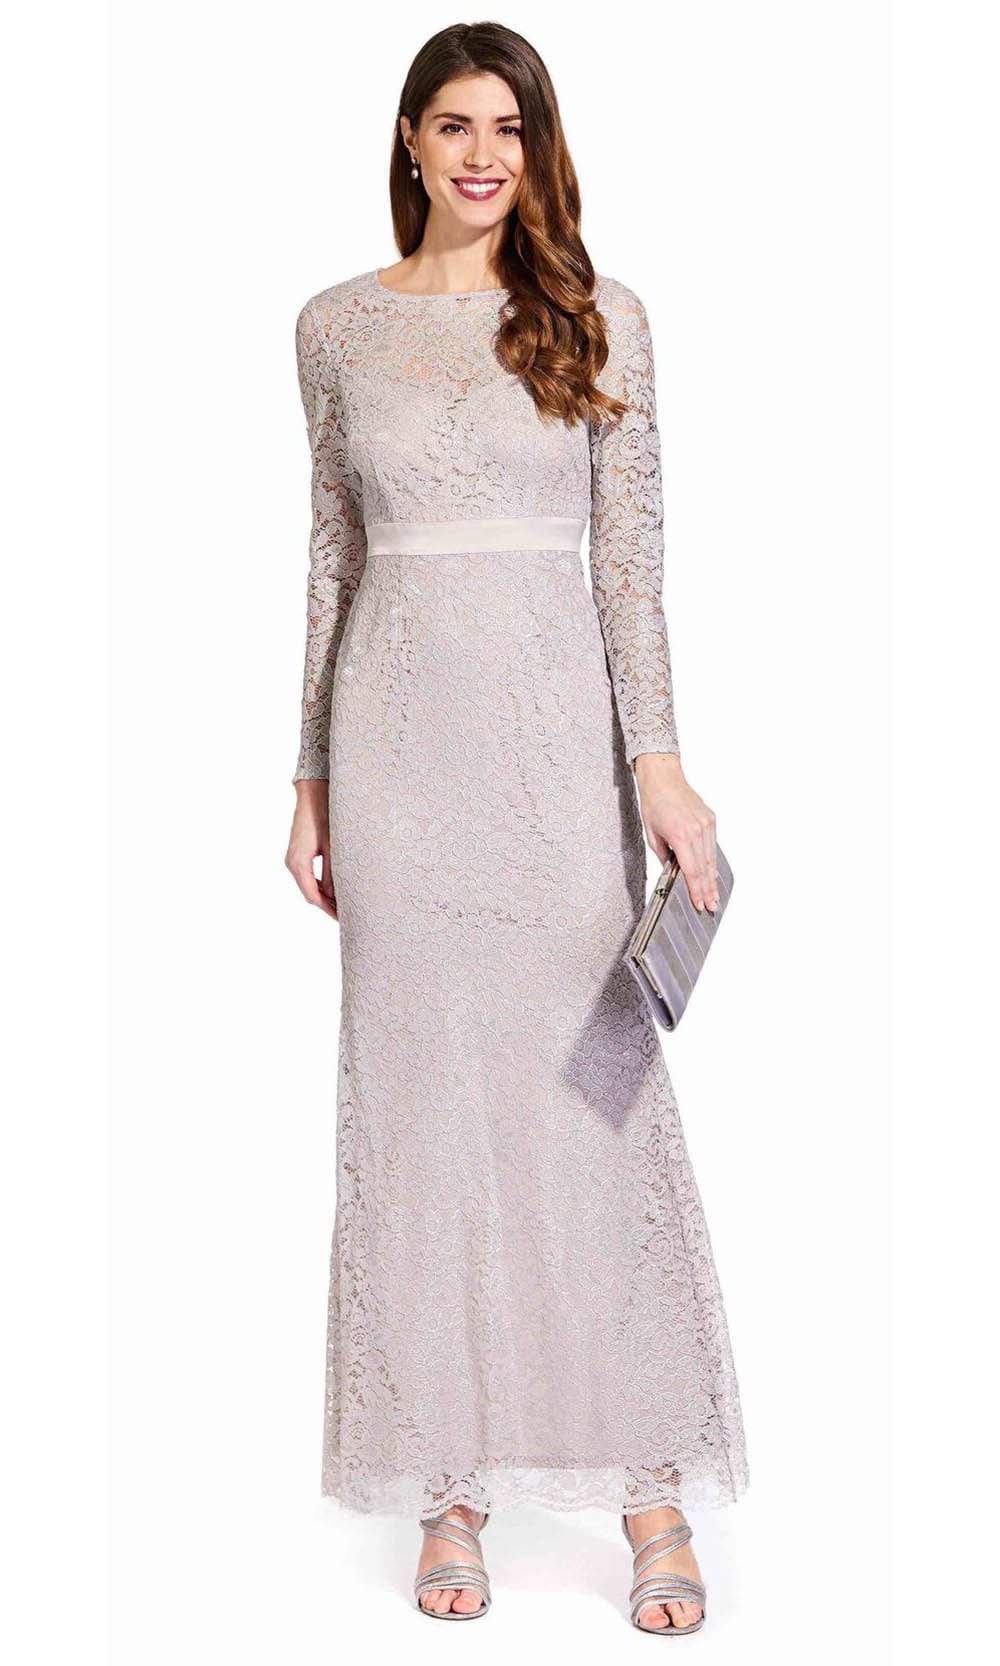 Adrianna Papell - AP1E205128 Lace Long Sleeve Fitted Dress Mother of the Bride Dresses